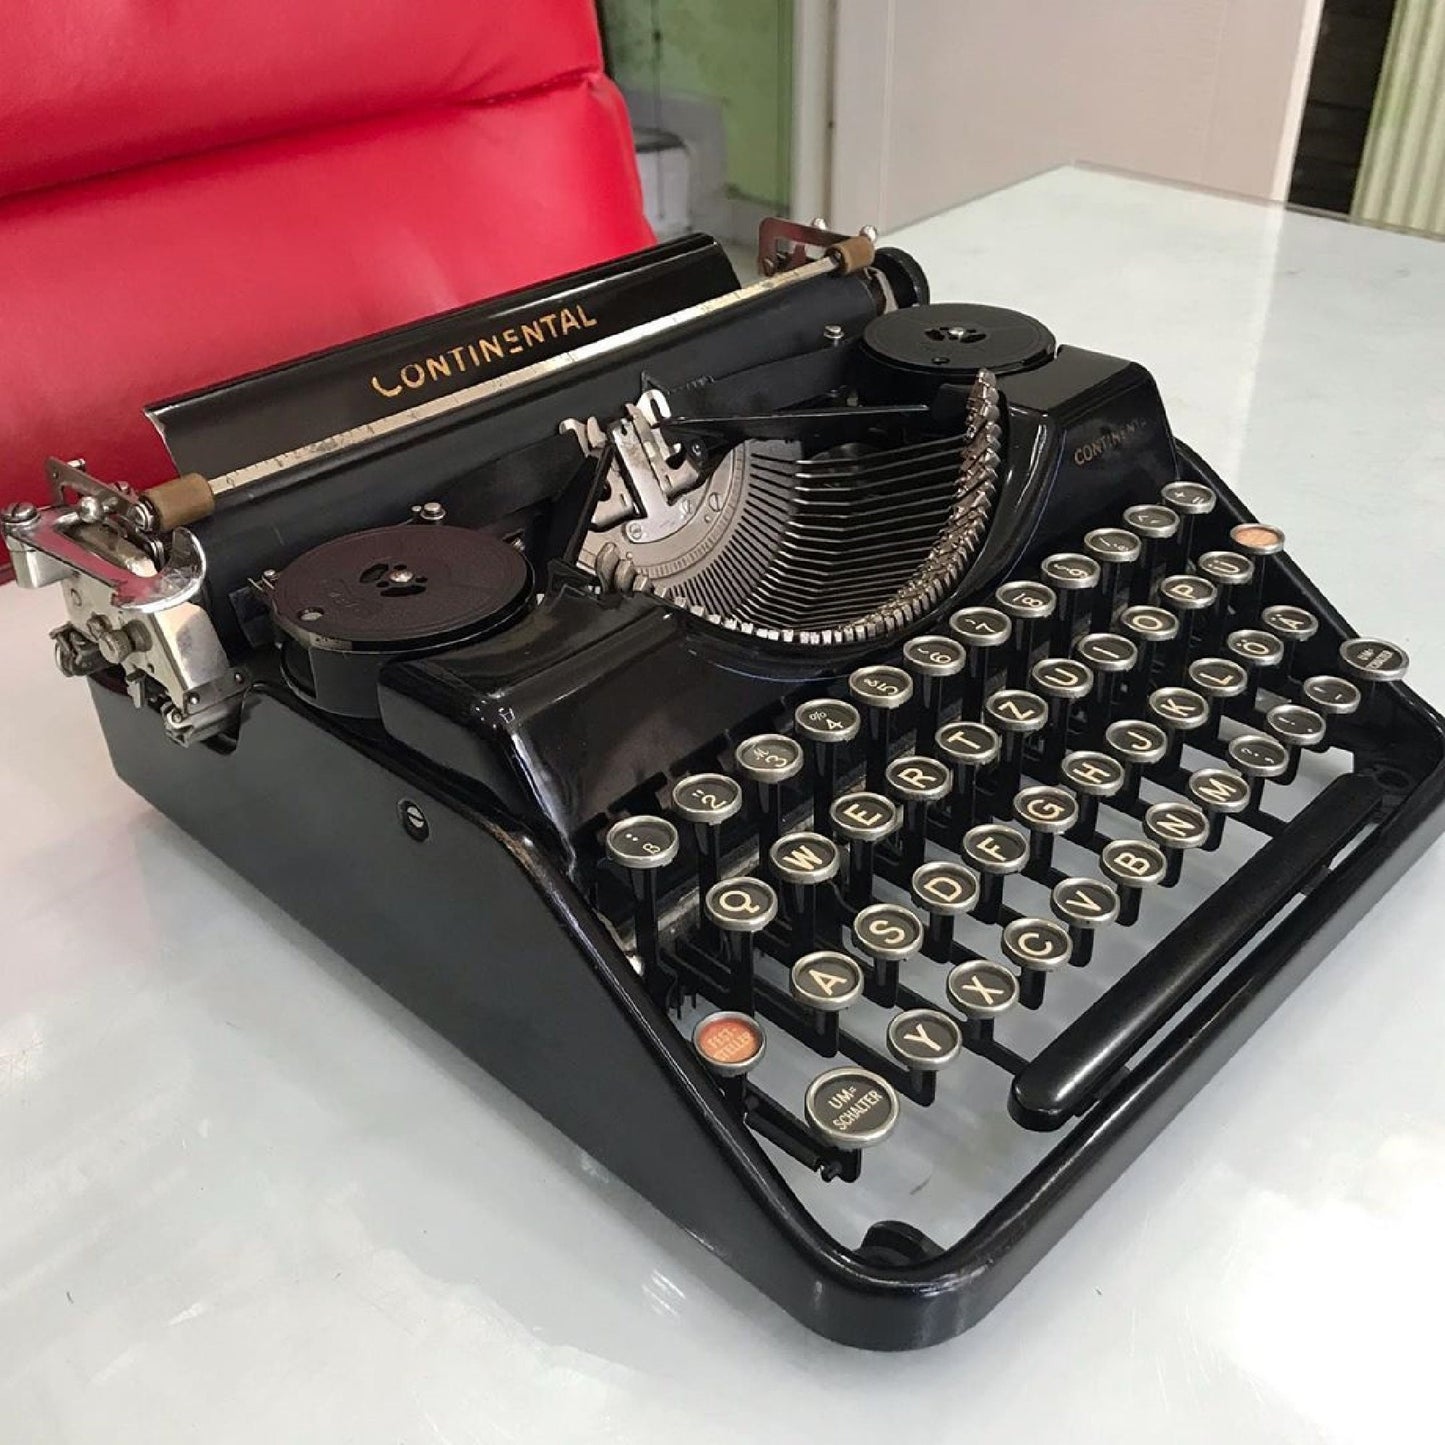 Continental Typewriter | Vintage Glass Keyboard, Fully Operational | 1940 Model Black Elegance for an Inspired Writing Experience